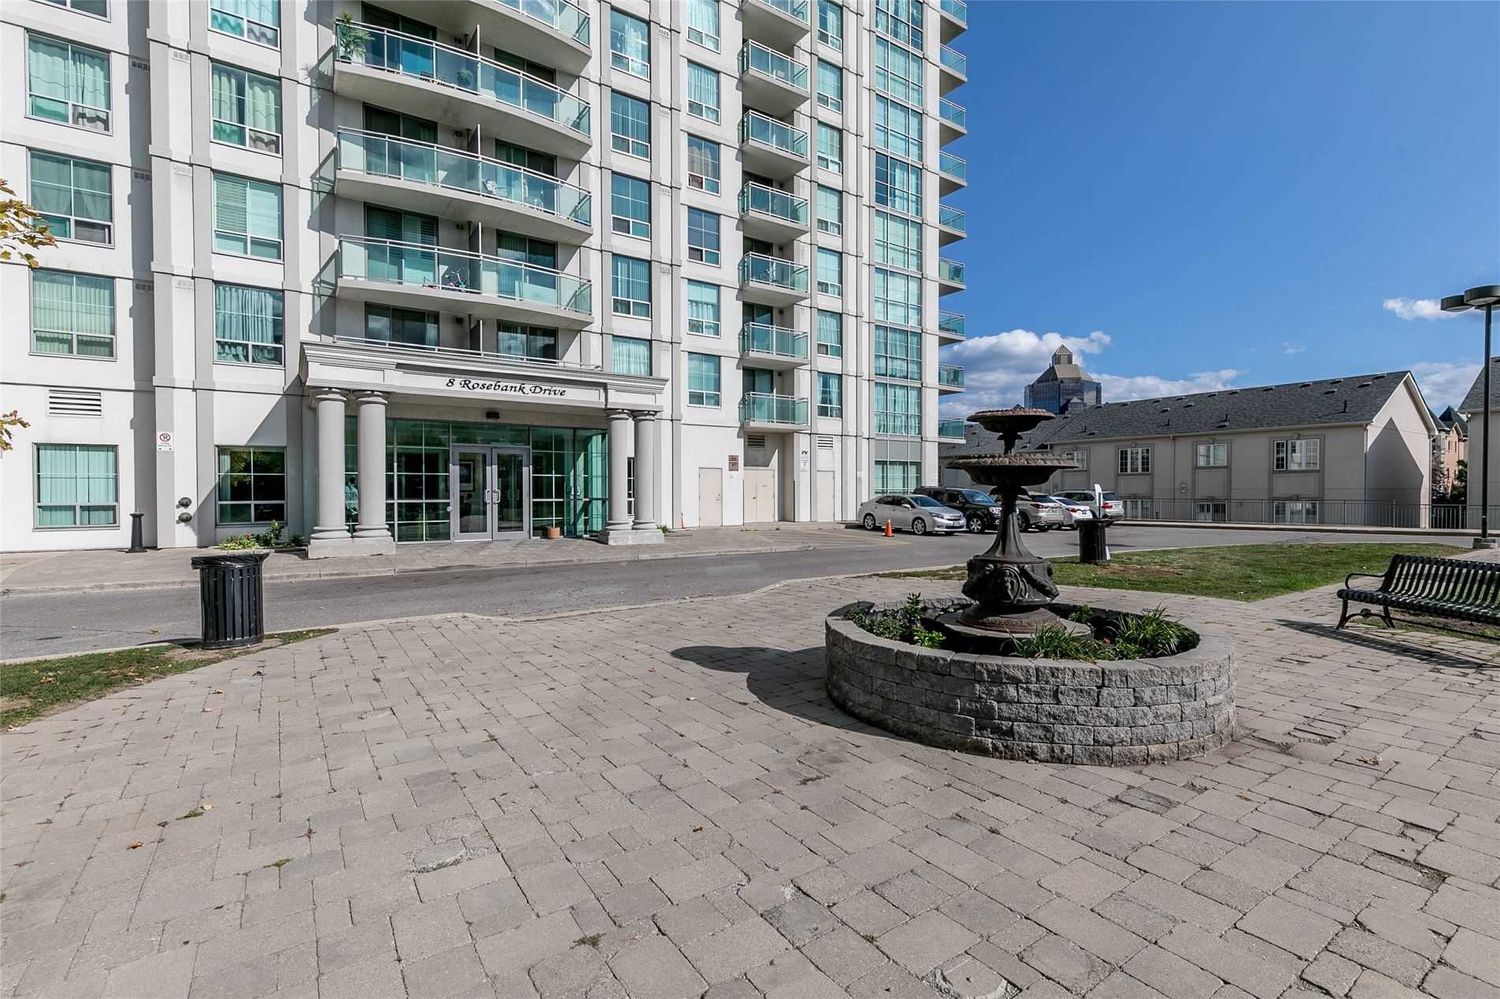 8 Rosebank Drive. Markham Place Condos is located in  Scarborough, Toronto - image #2 of 2